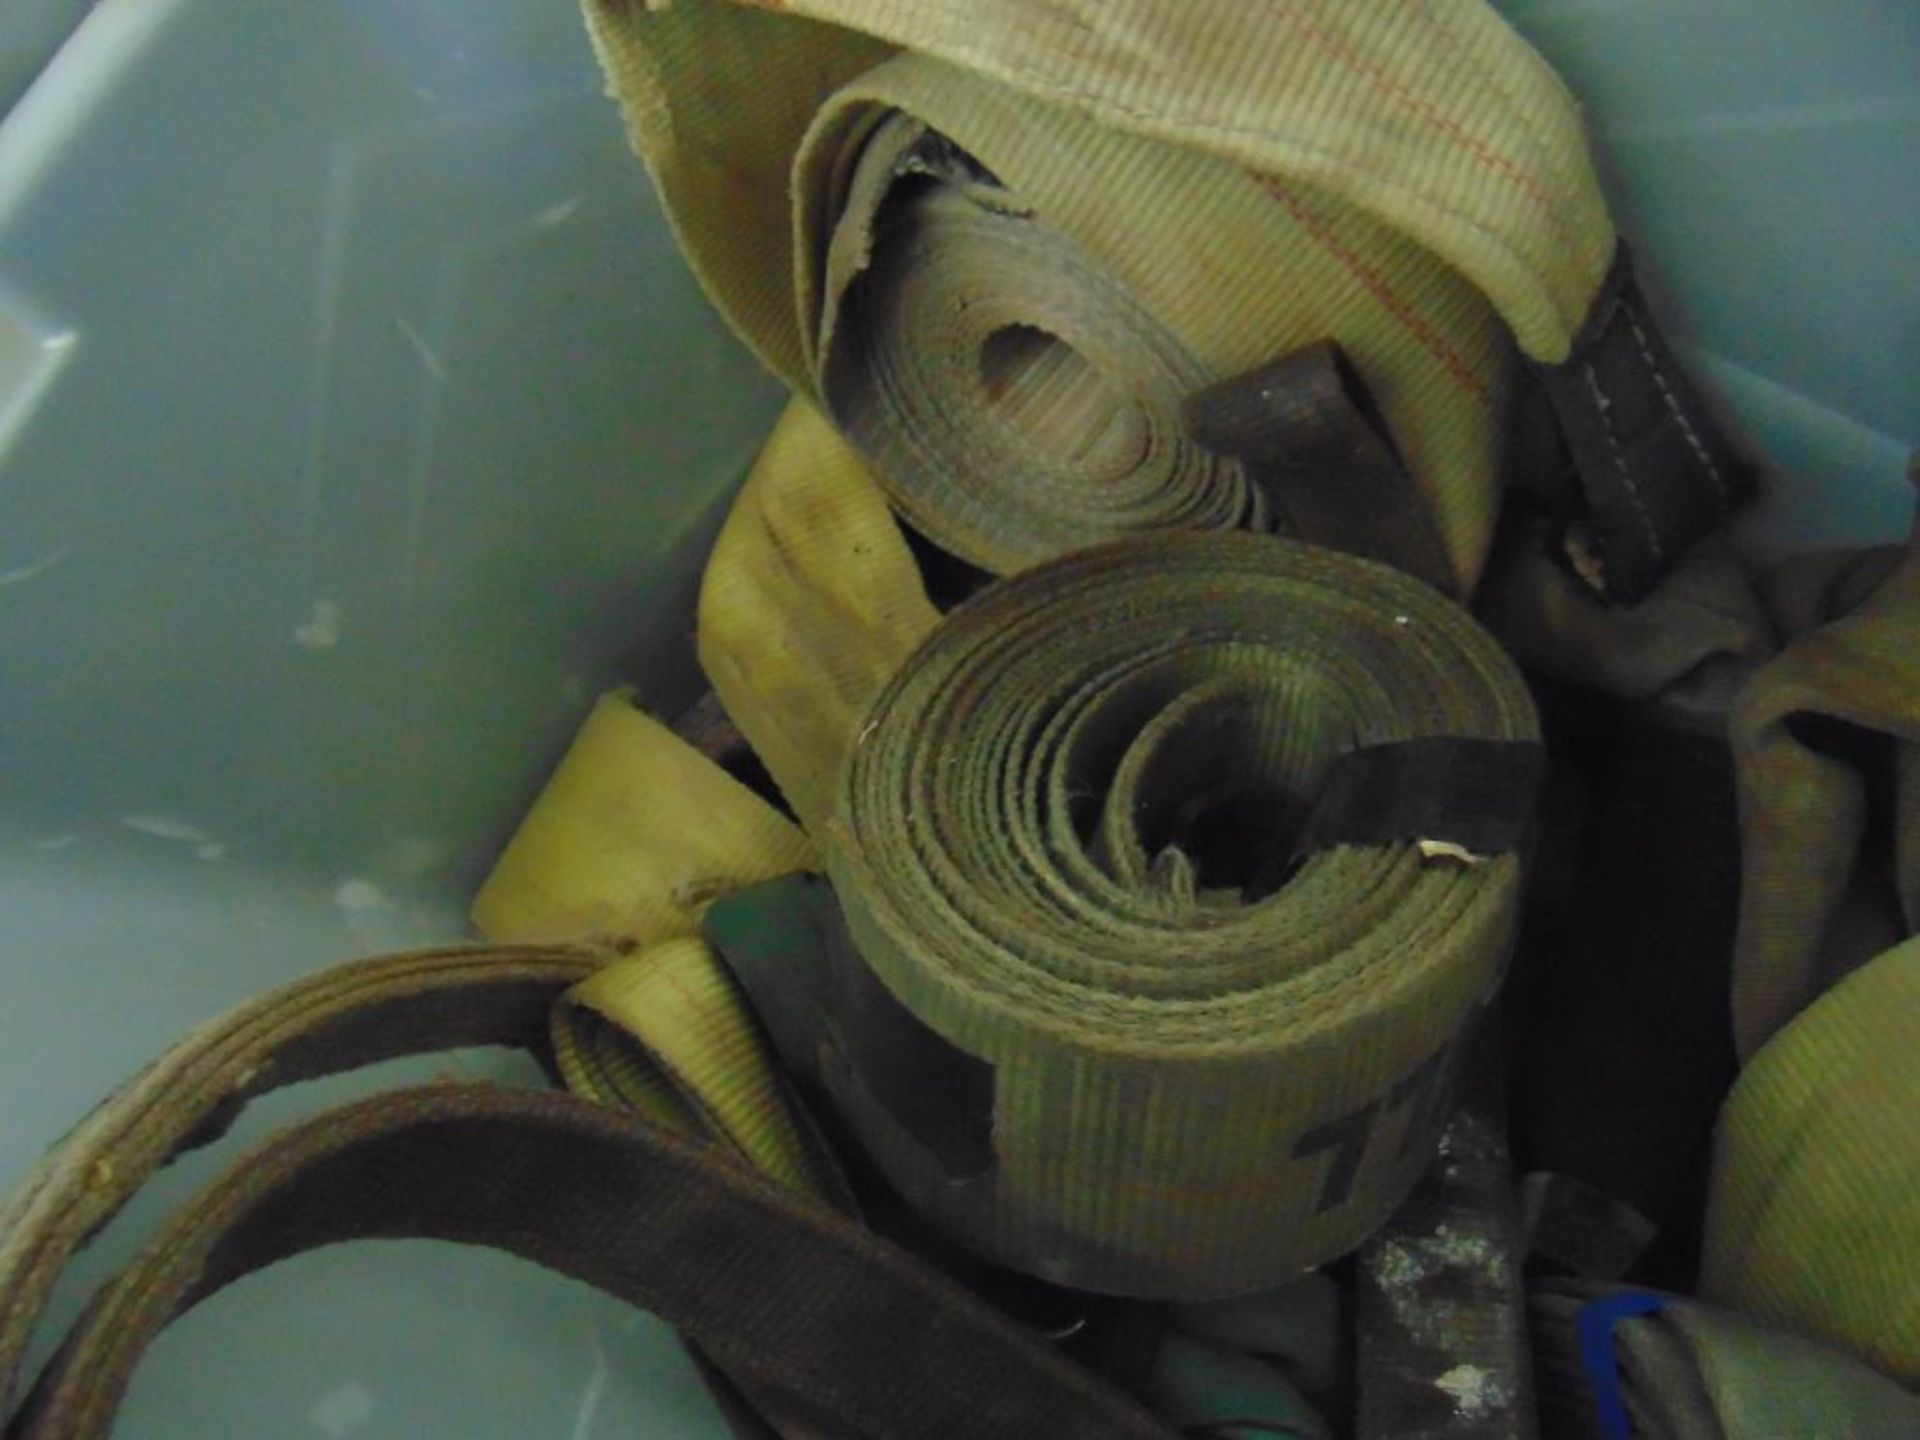 Lot of Tow Straps And Slings - Image 5 of 5